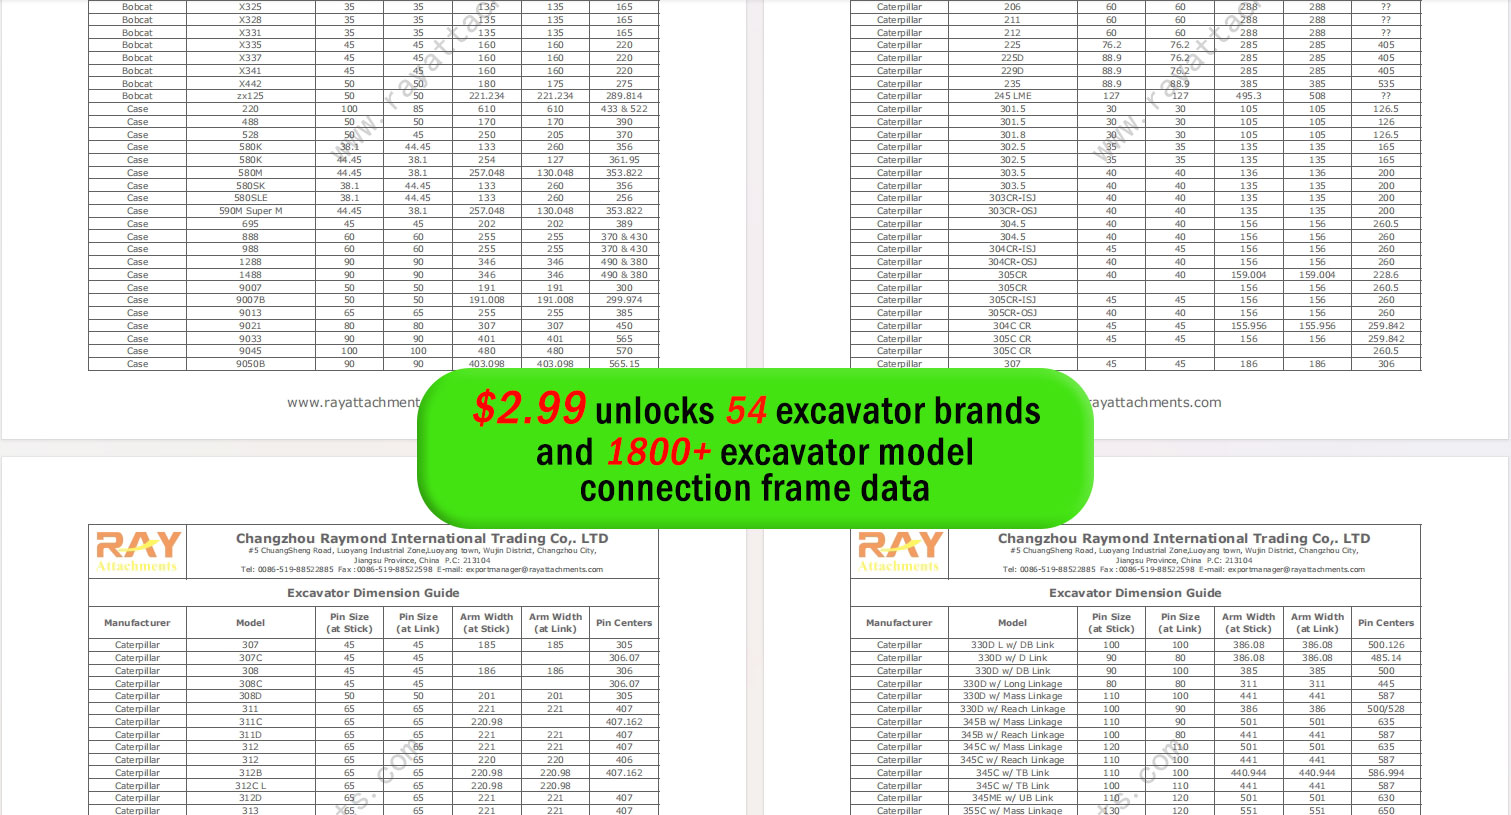 $2.99 for The Ultimate Excavator Coupling Frame Database: 54 Brands, 1800+ Models with Full Refund Guarantee!